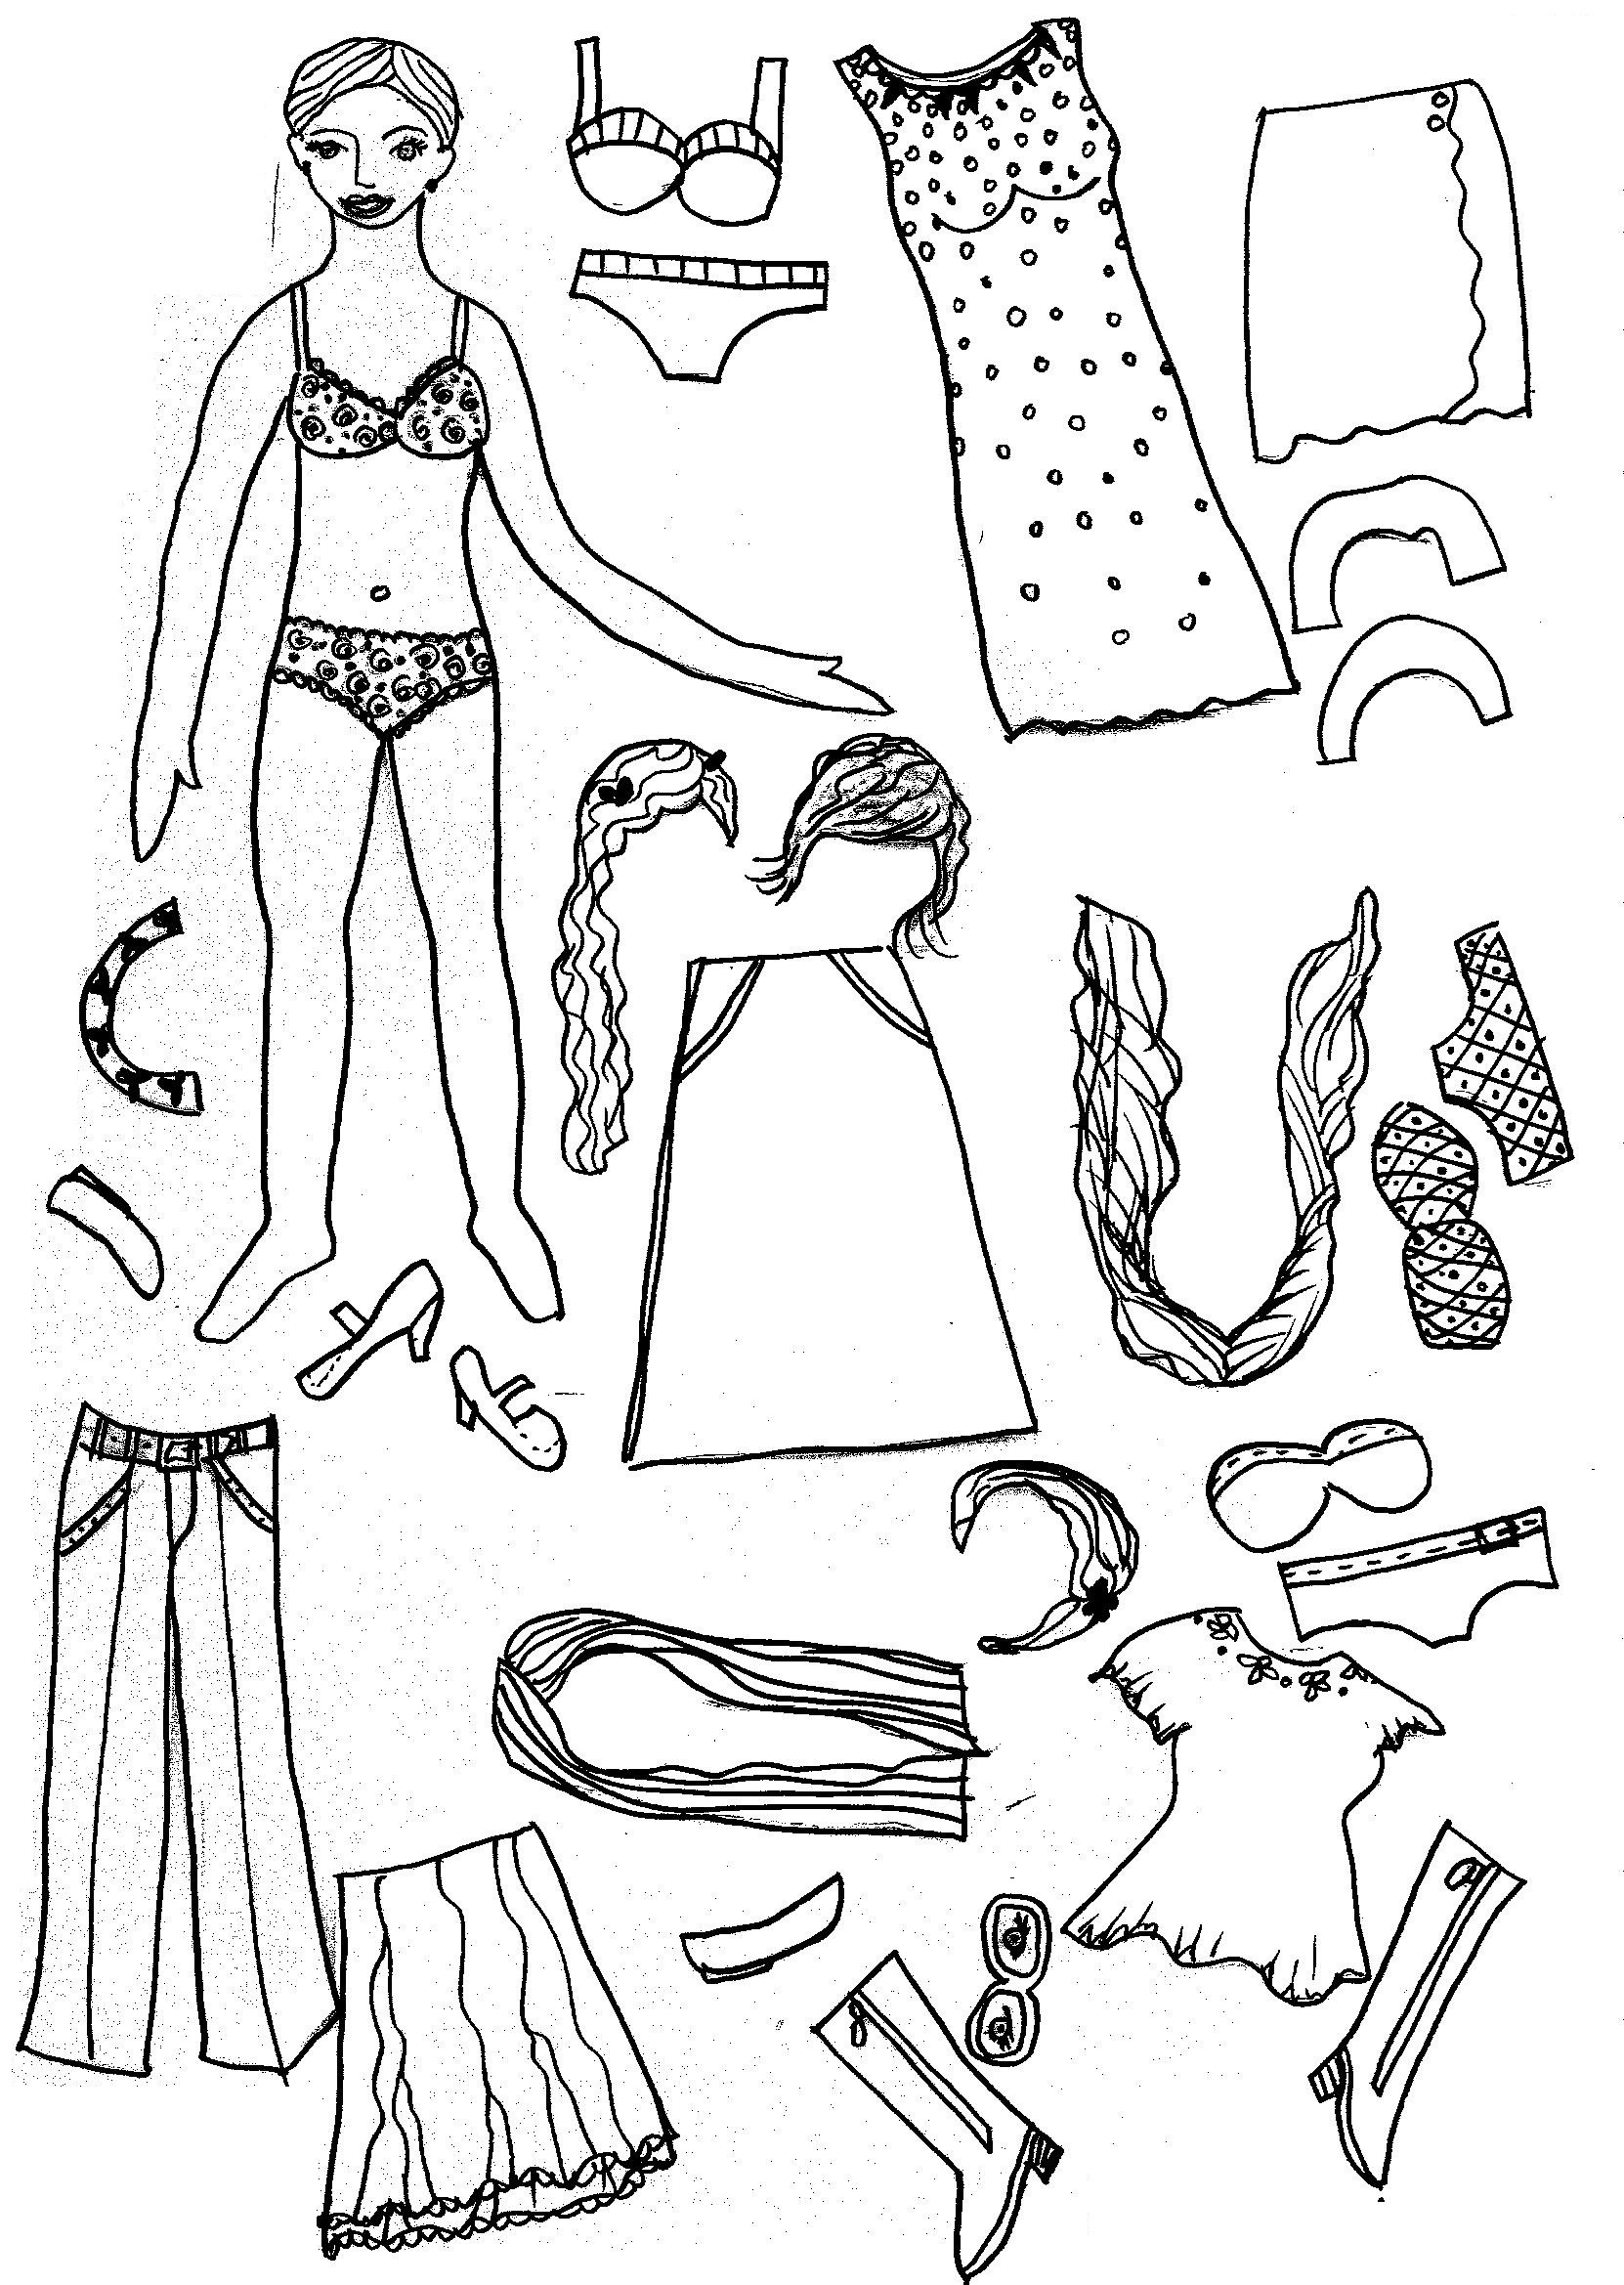 Coloring Pages : Paper Dollloring Pages Printableloringmem Realistic - Free Printable Paper Doll Coloring Pages